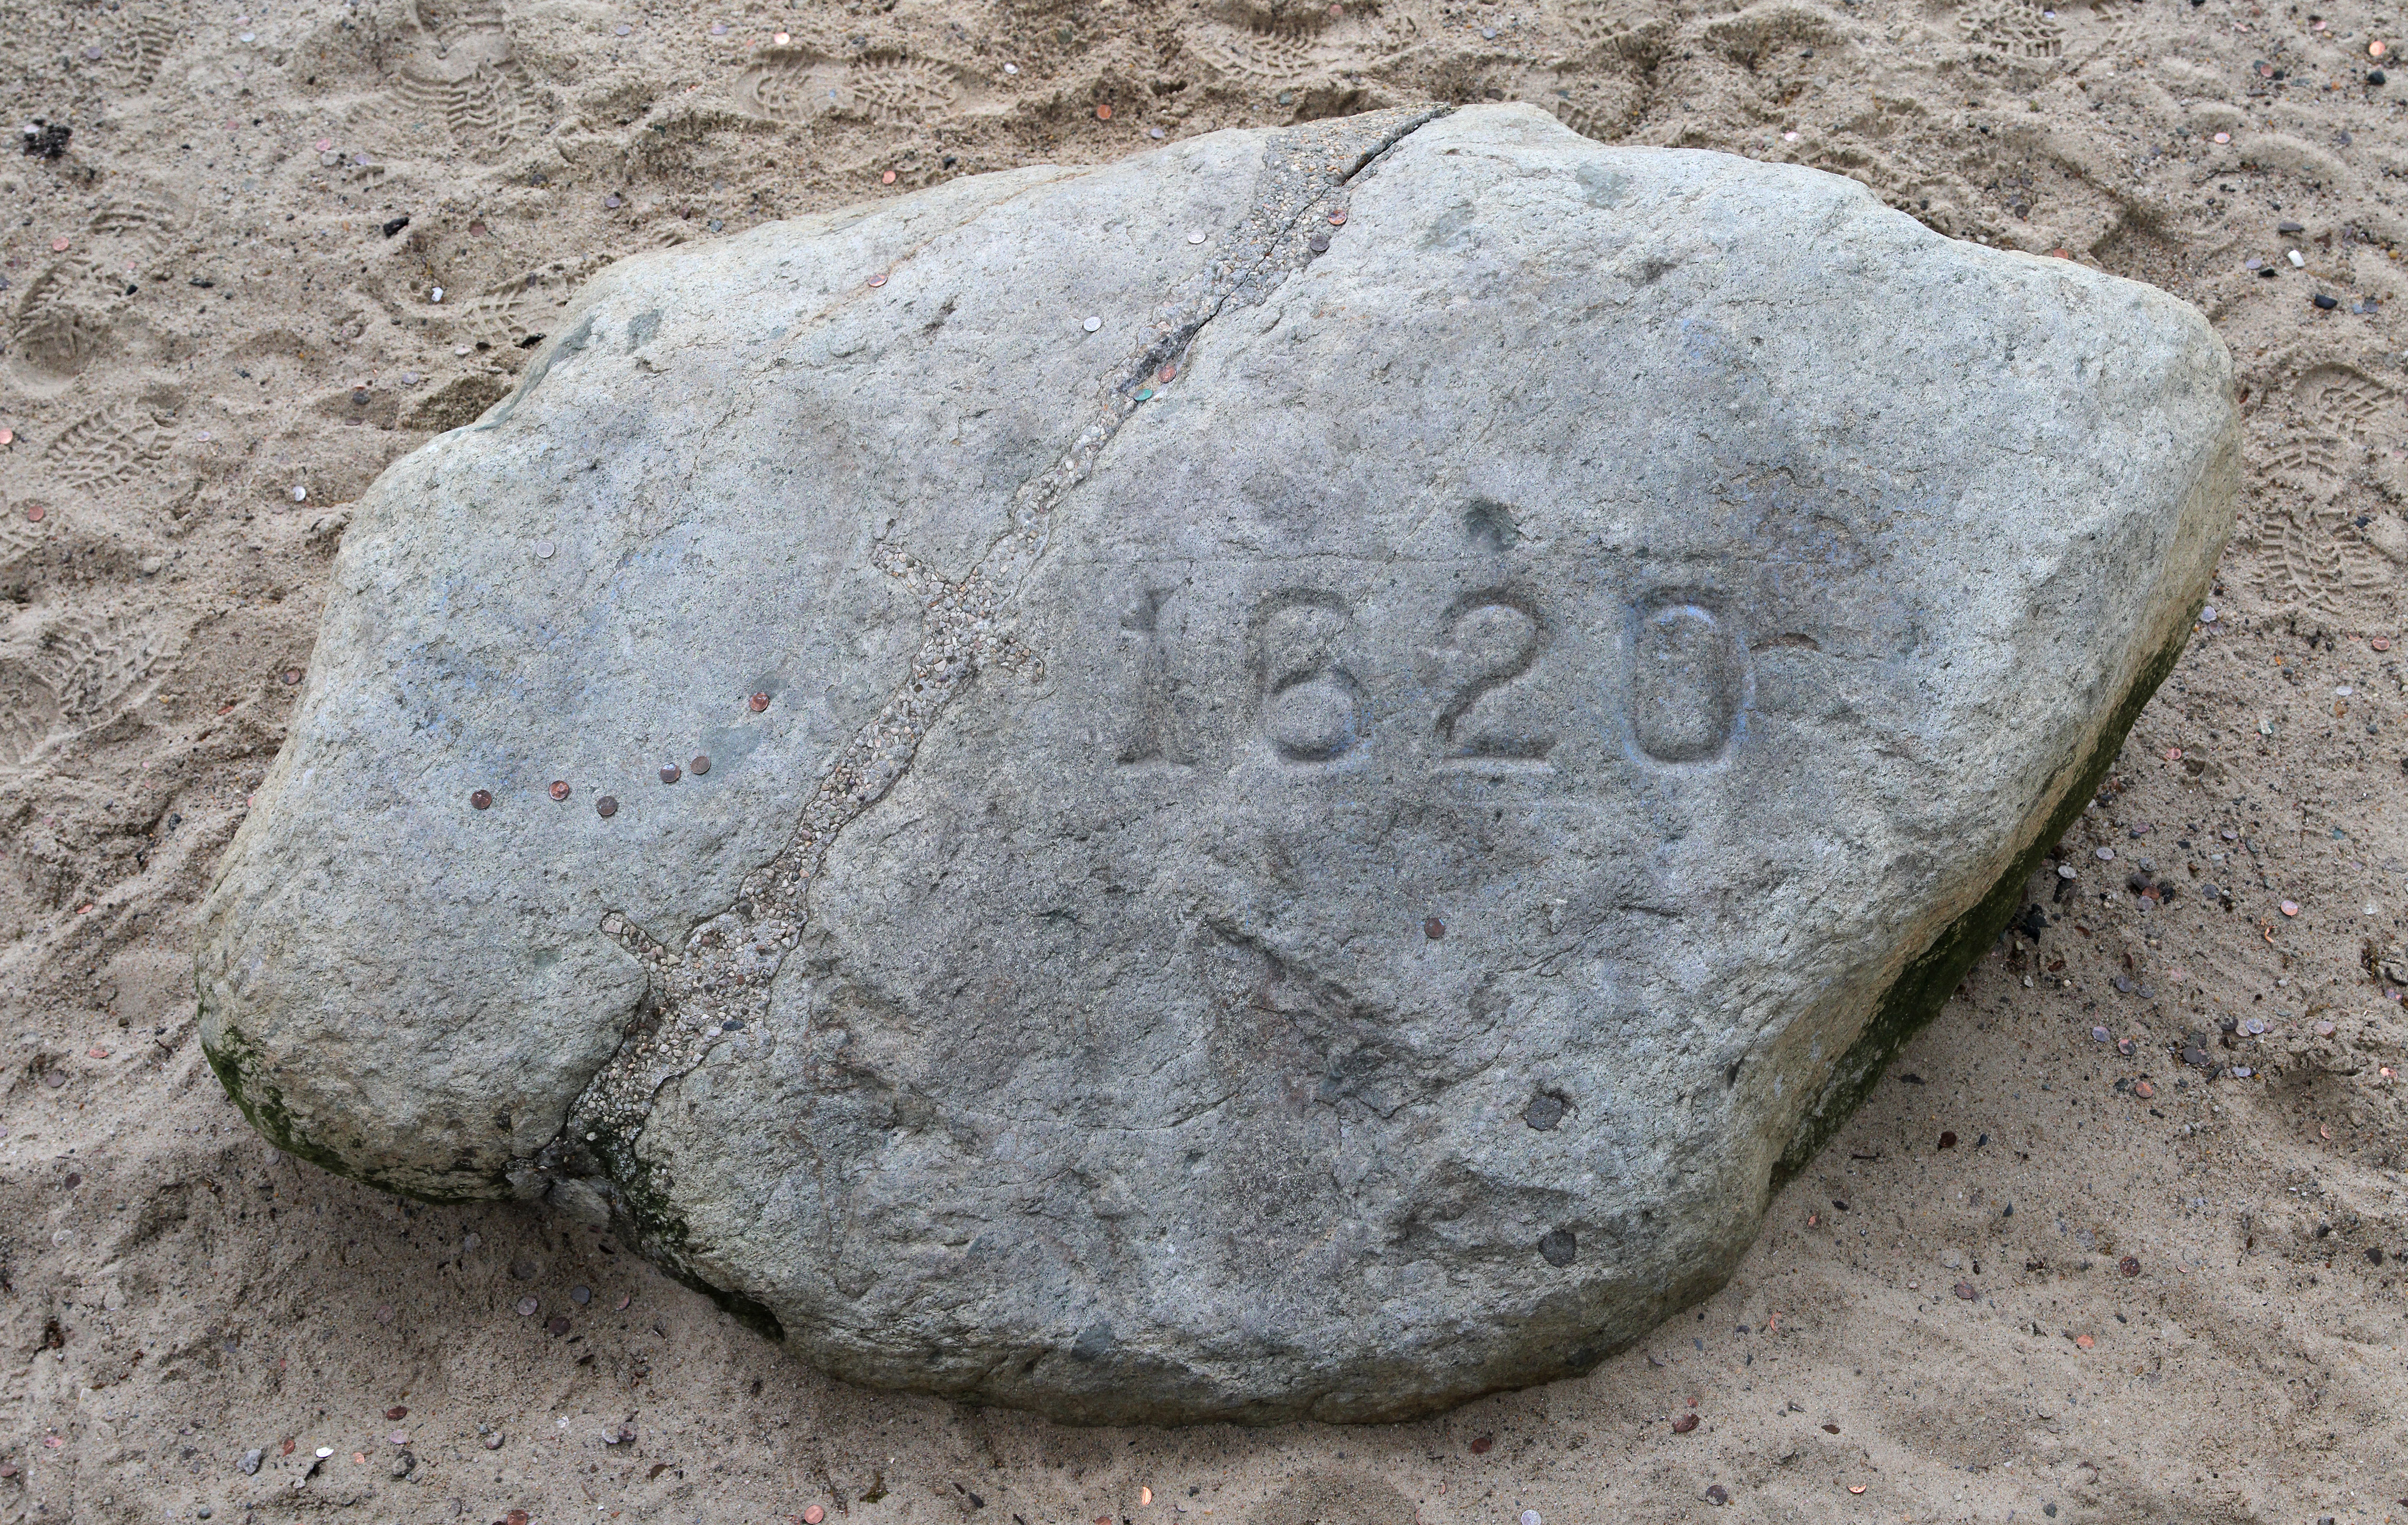 Plymouth Rock PNG-PlusPNG.com